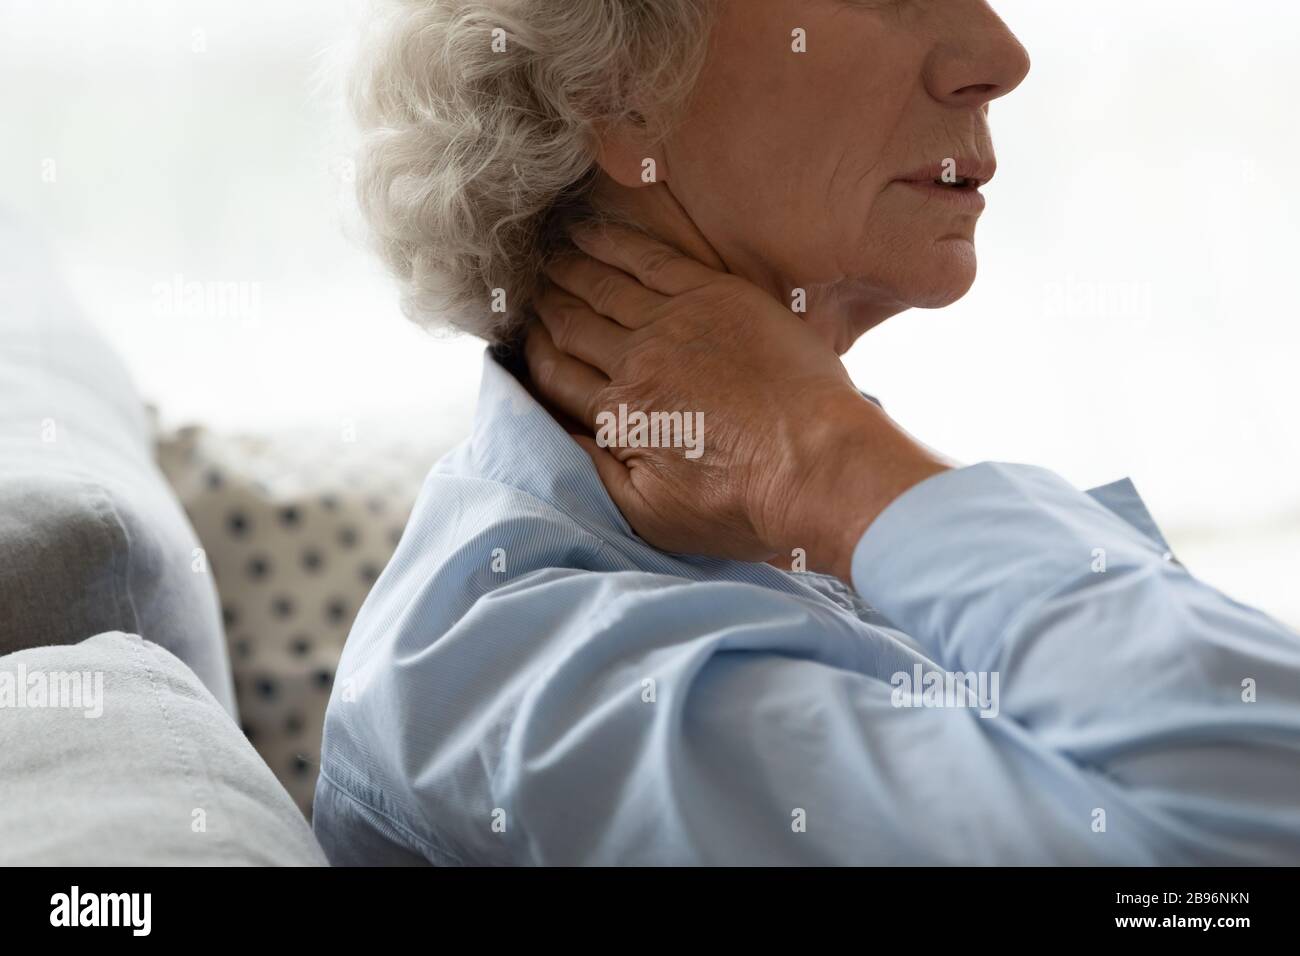 Sick elderly woman touch neck suffering from painful feeling Stock Photo